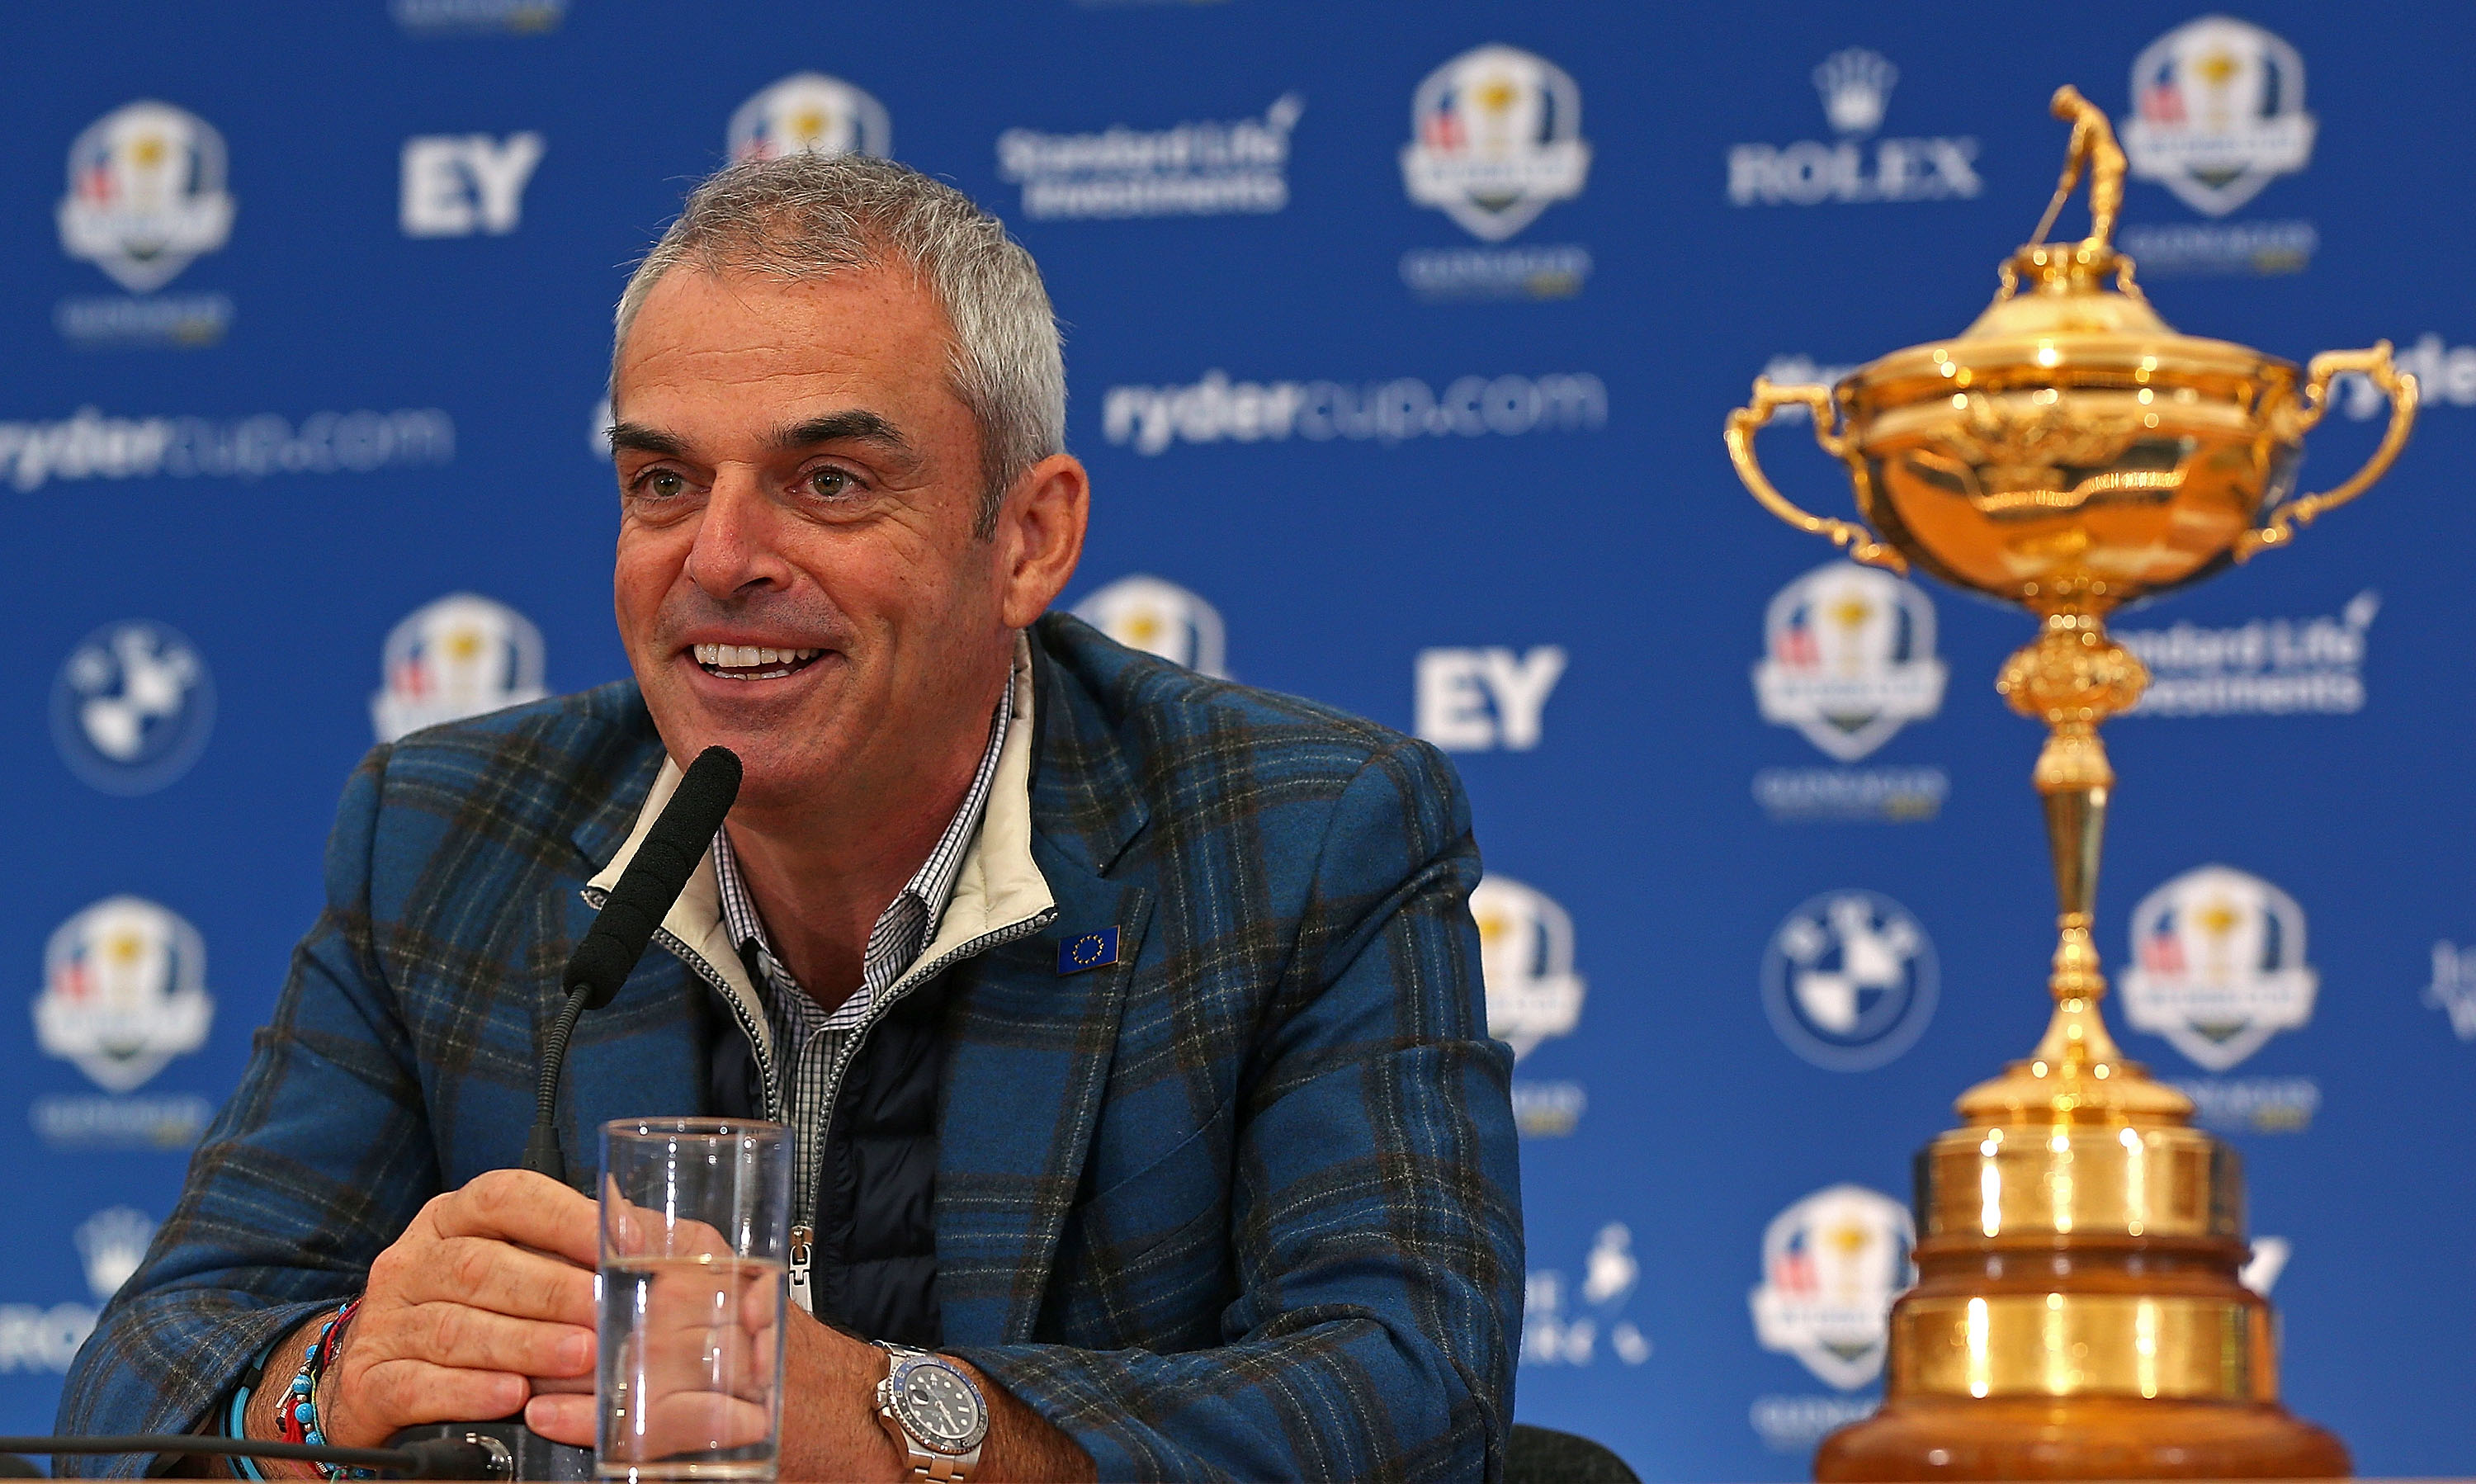 Presidents Cup 101: Format, history and FAQ's - NBC Sports